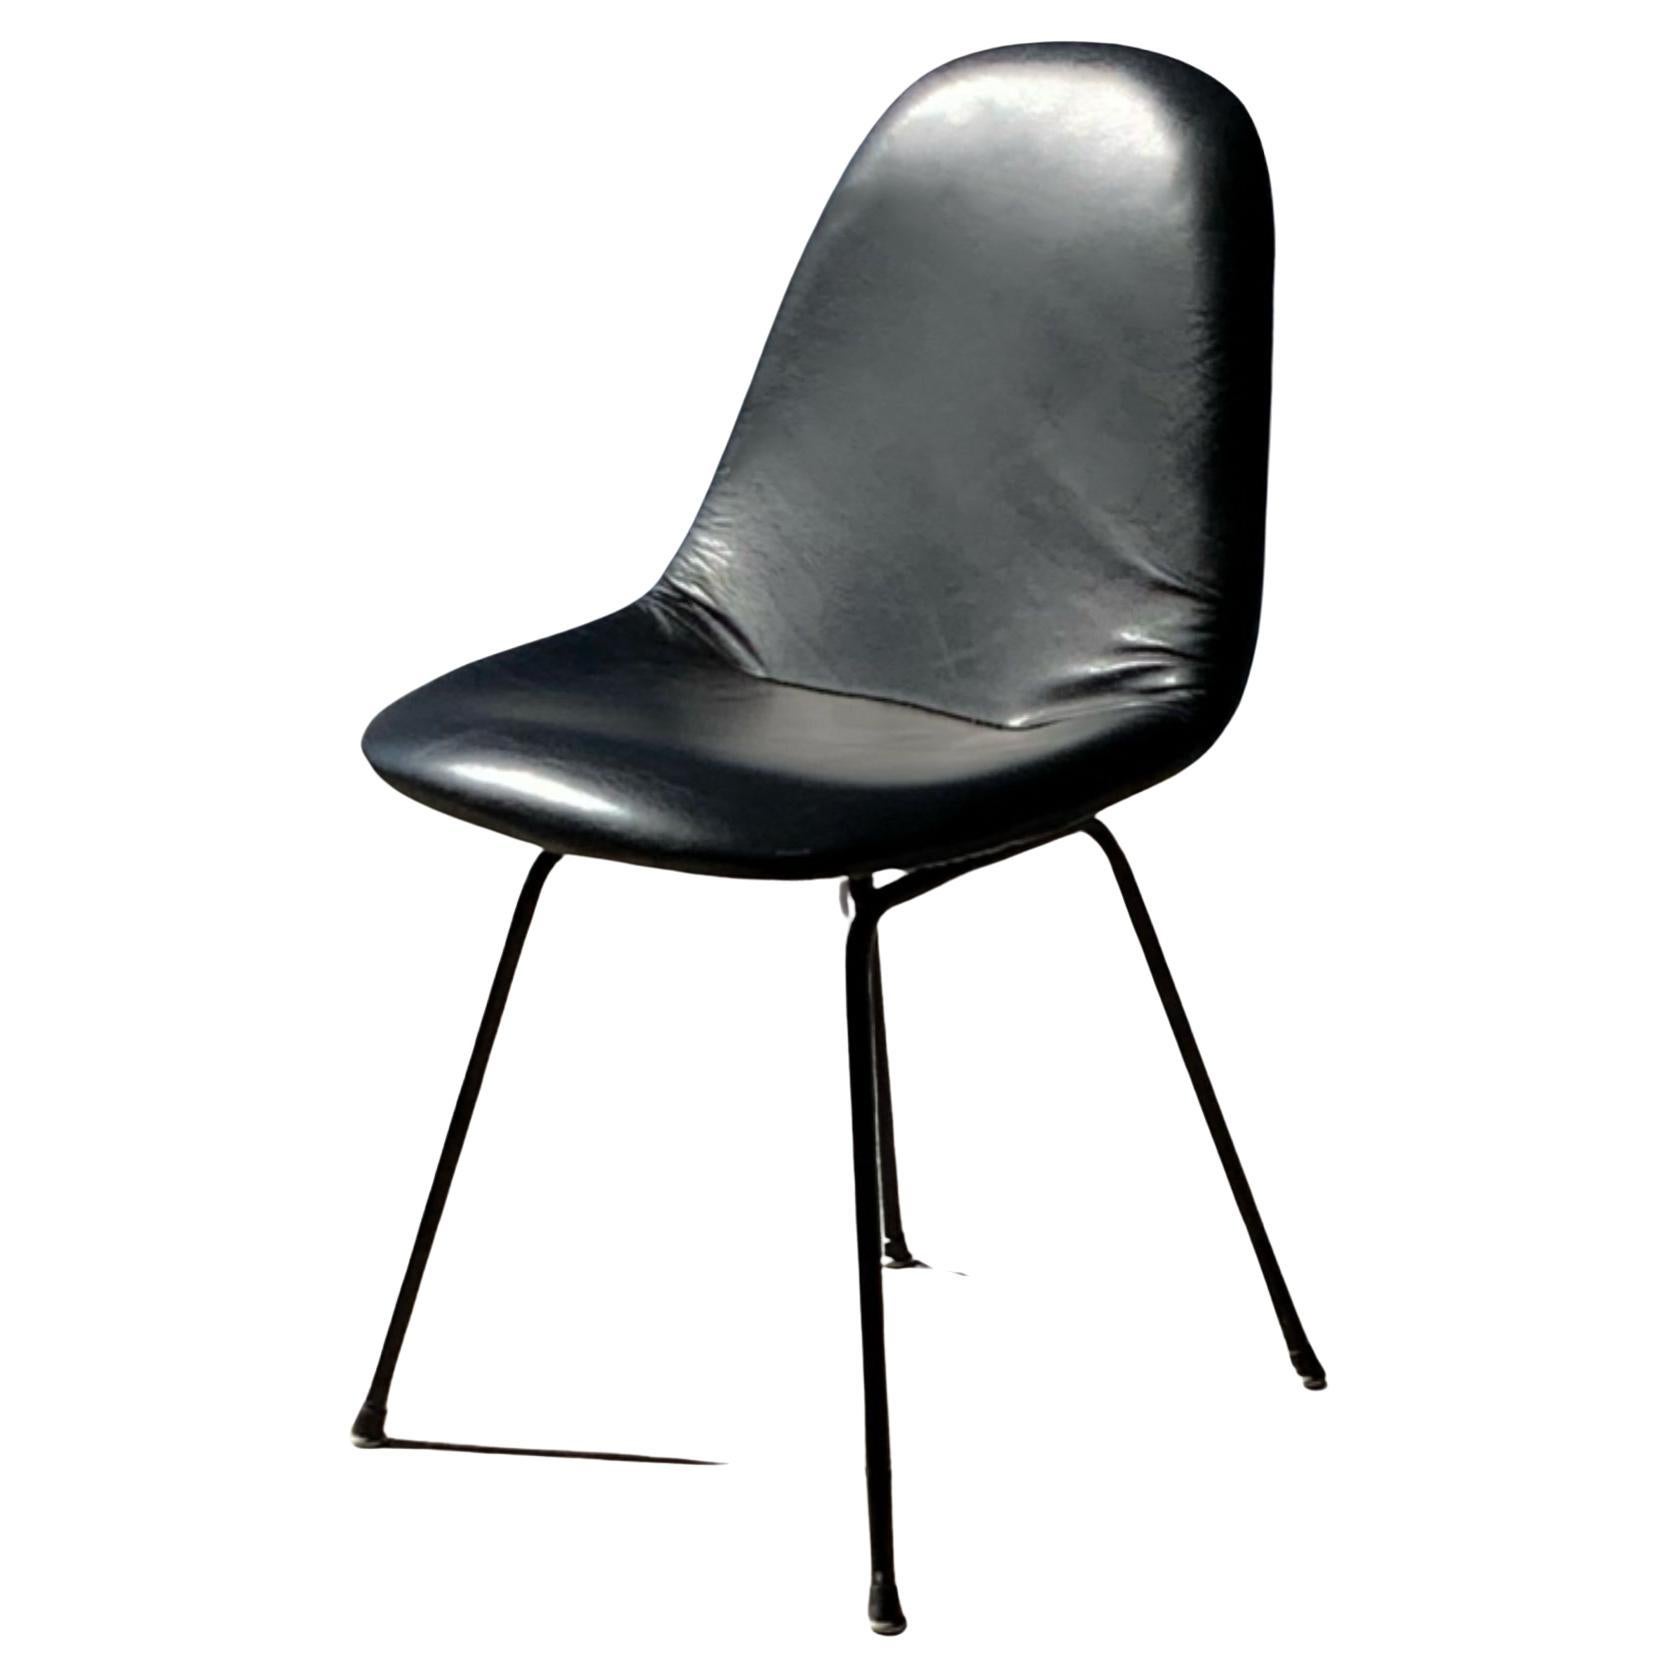 Charles and Ray Eames for Herman Miller DKX-1 Chair, Black Leather, H-Base, 1955 For Sale